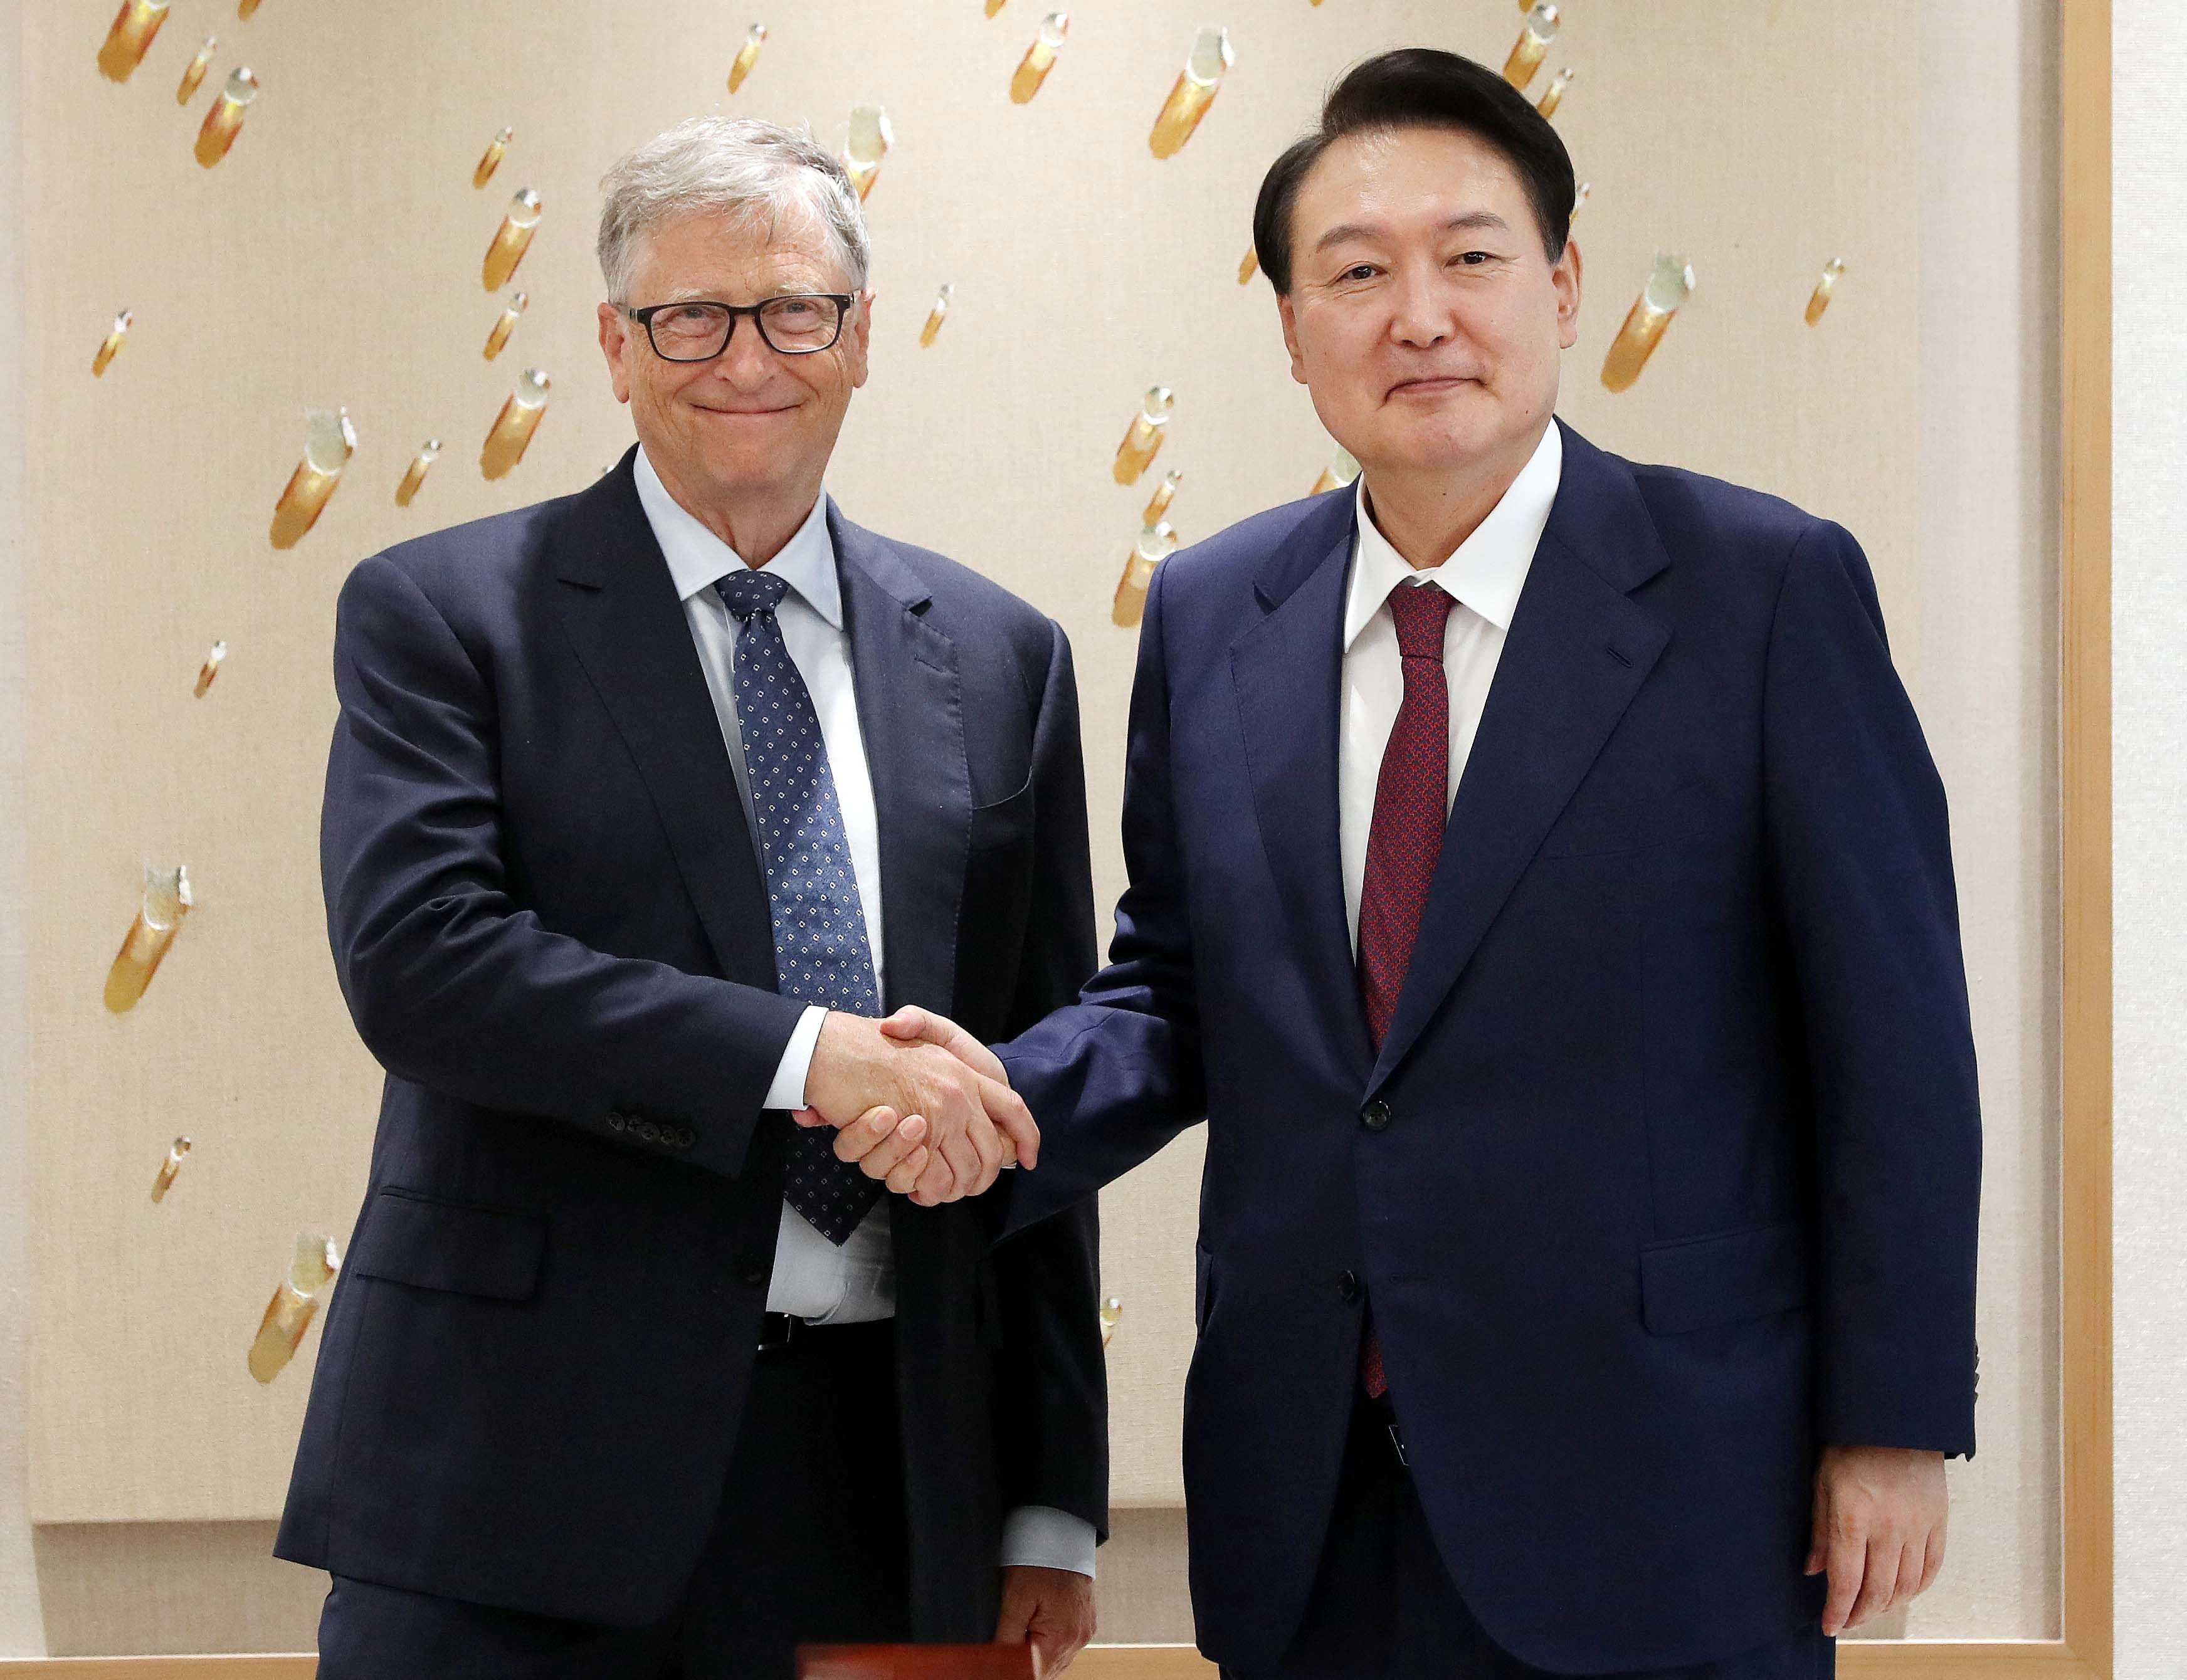 Microsoft Corp co-founder Bill Gates meets with South Korean President Yoon Suk-yeol in Seoul